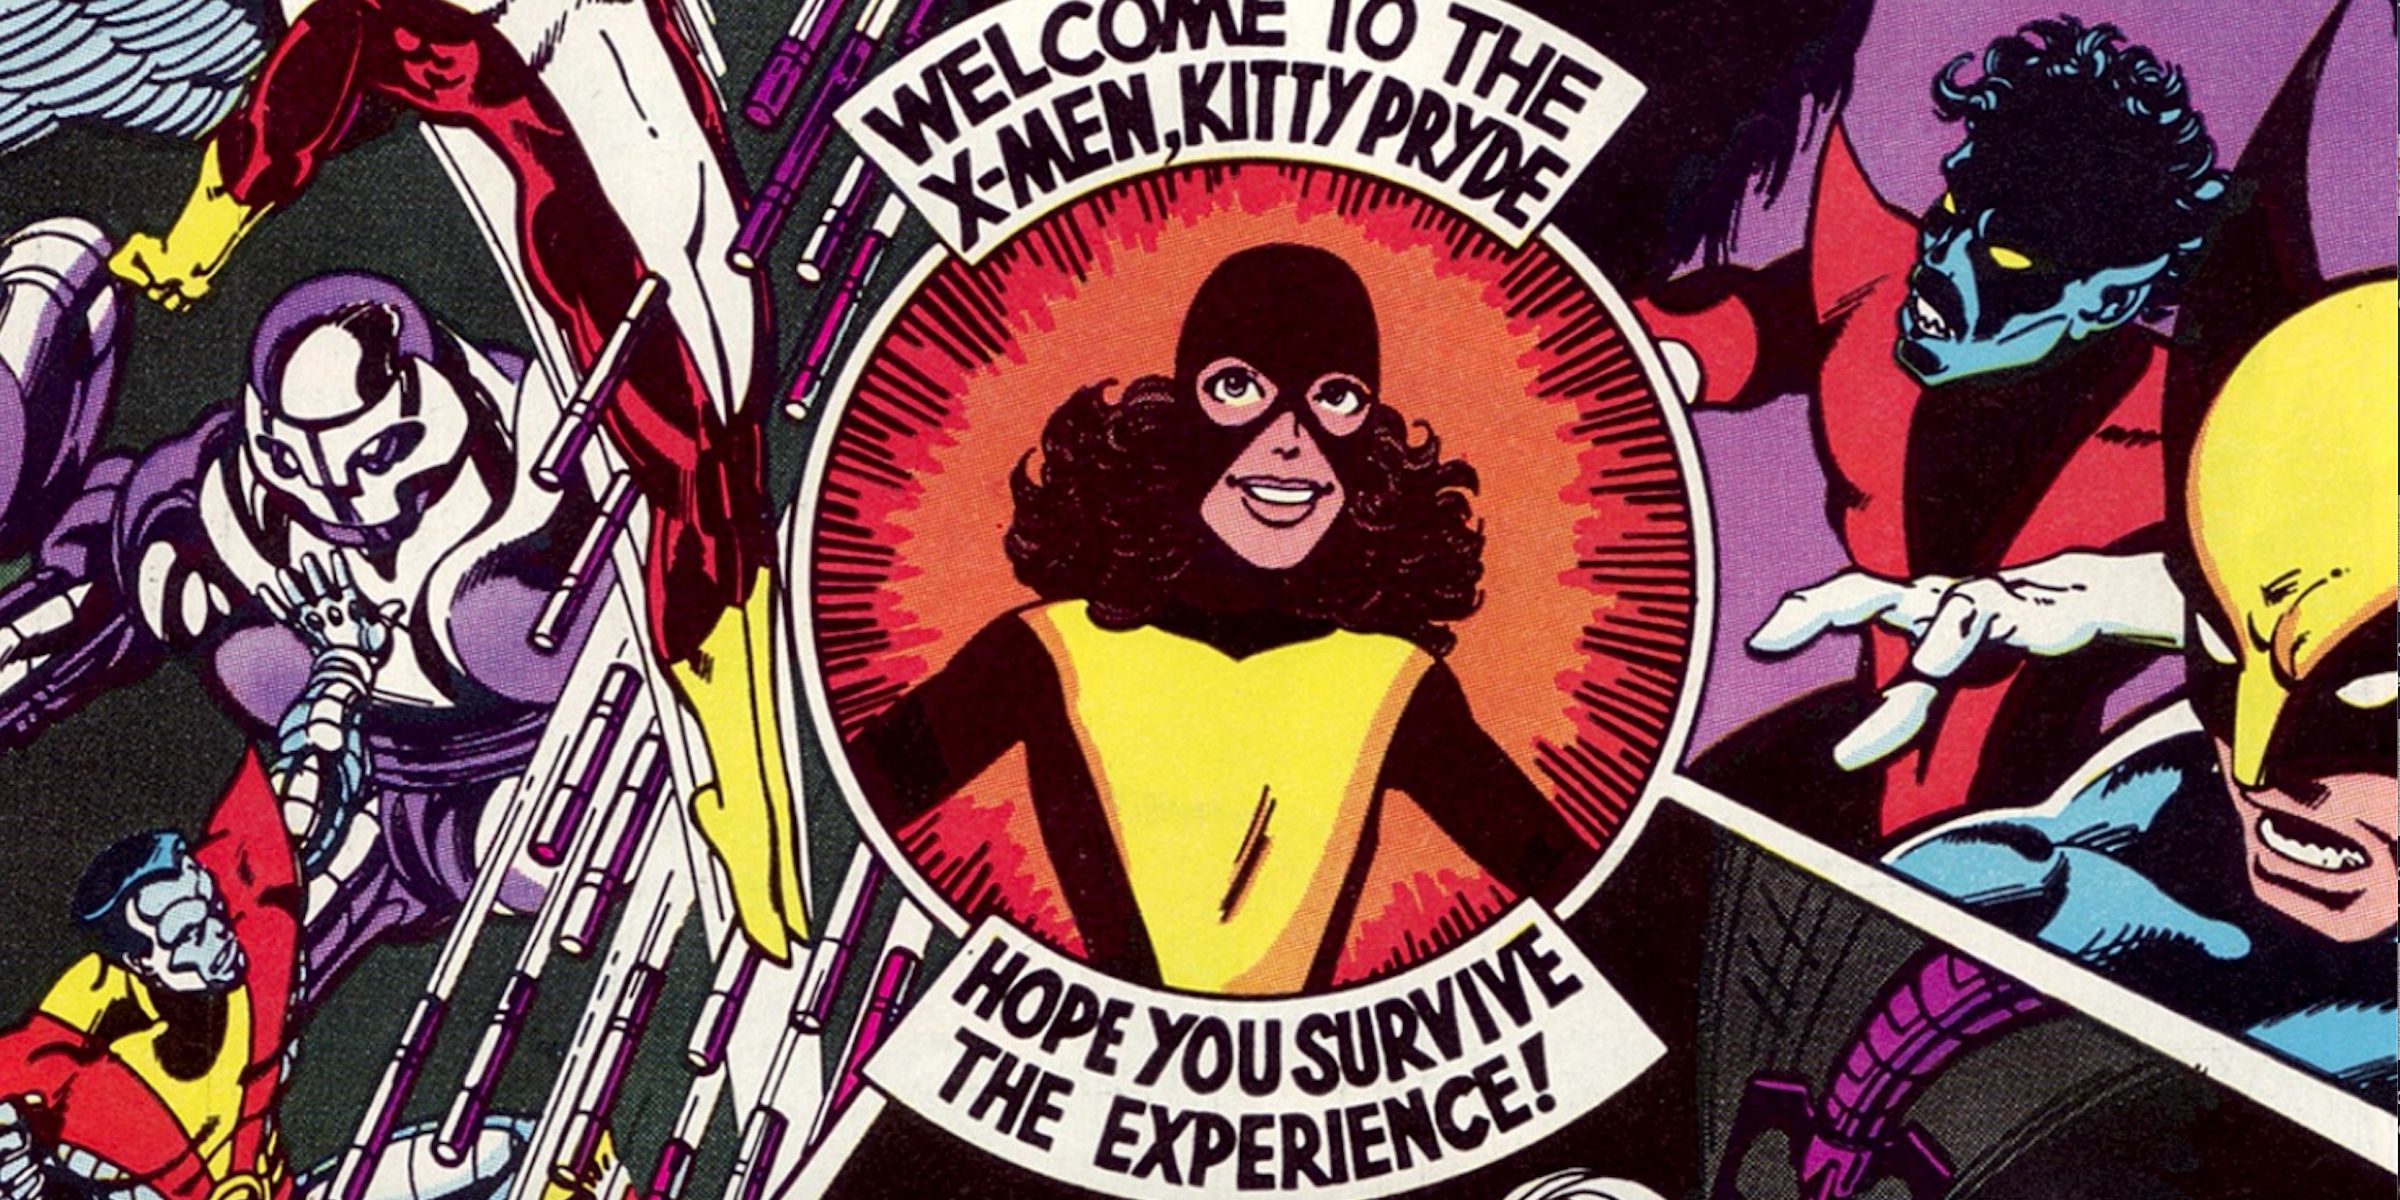 Kitty Pryde Officially Joins The Team in Uncanny X-Men 139